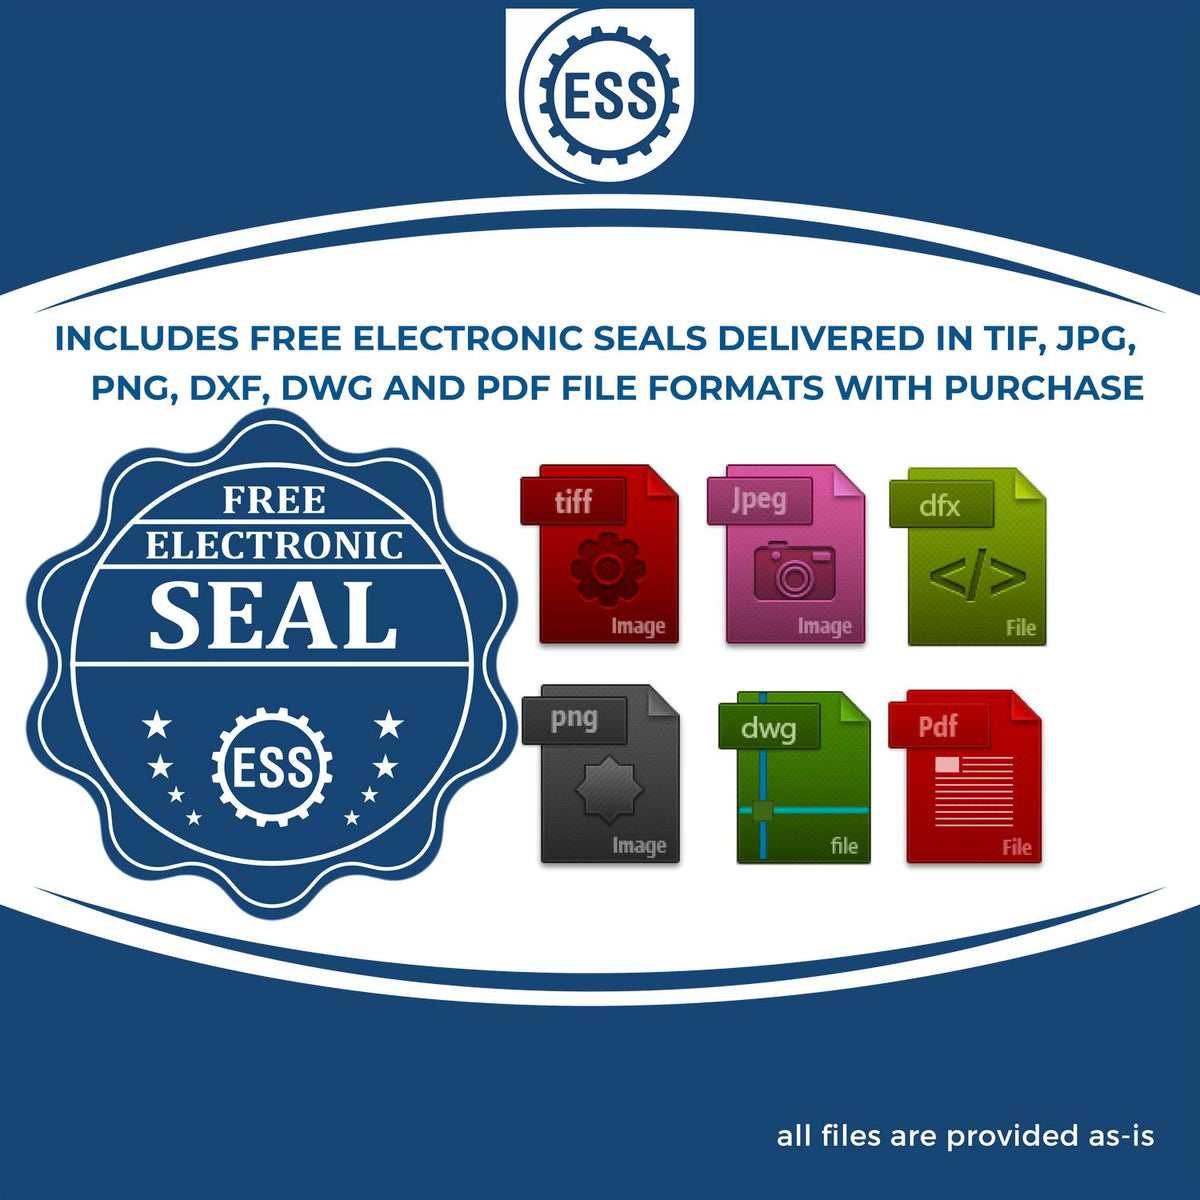 An infographic for the free electronic seal for the Premium MaxLight Pre-Inked Utah Landscape Architectural Stamp illustrating the different file type icons such as DXF, DWG, TIF, JPG and PNG.